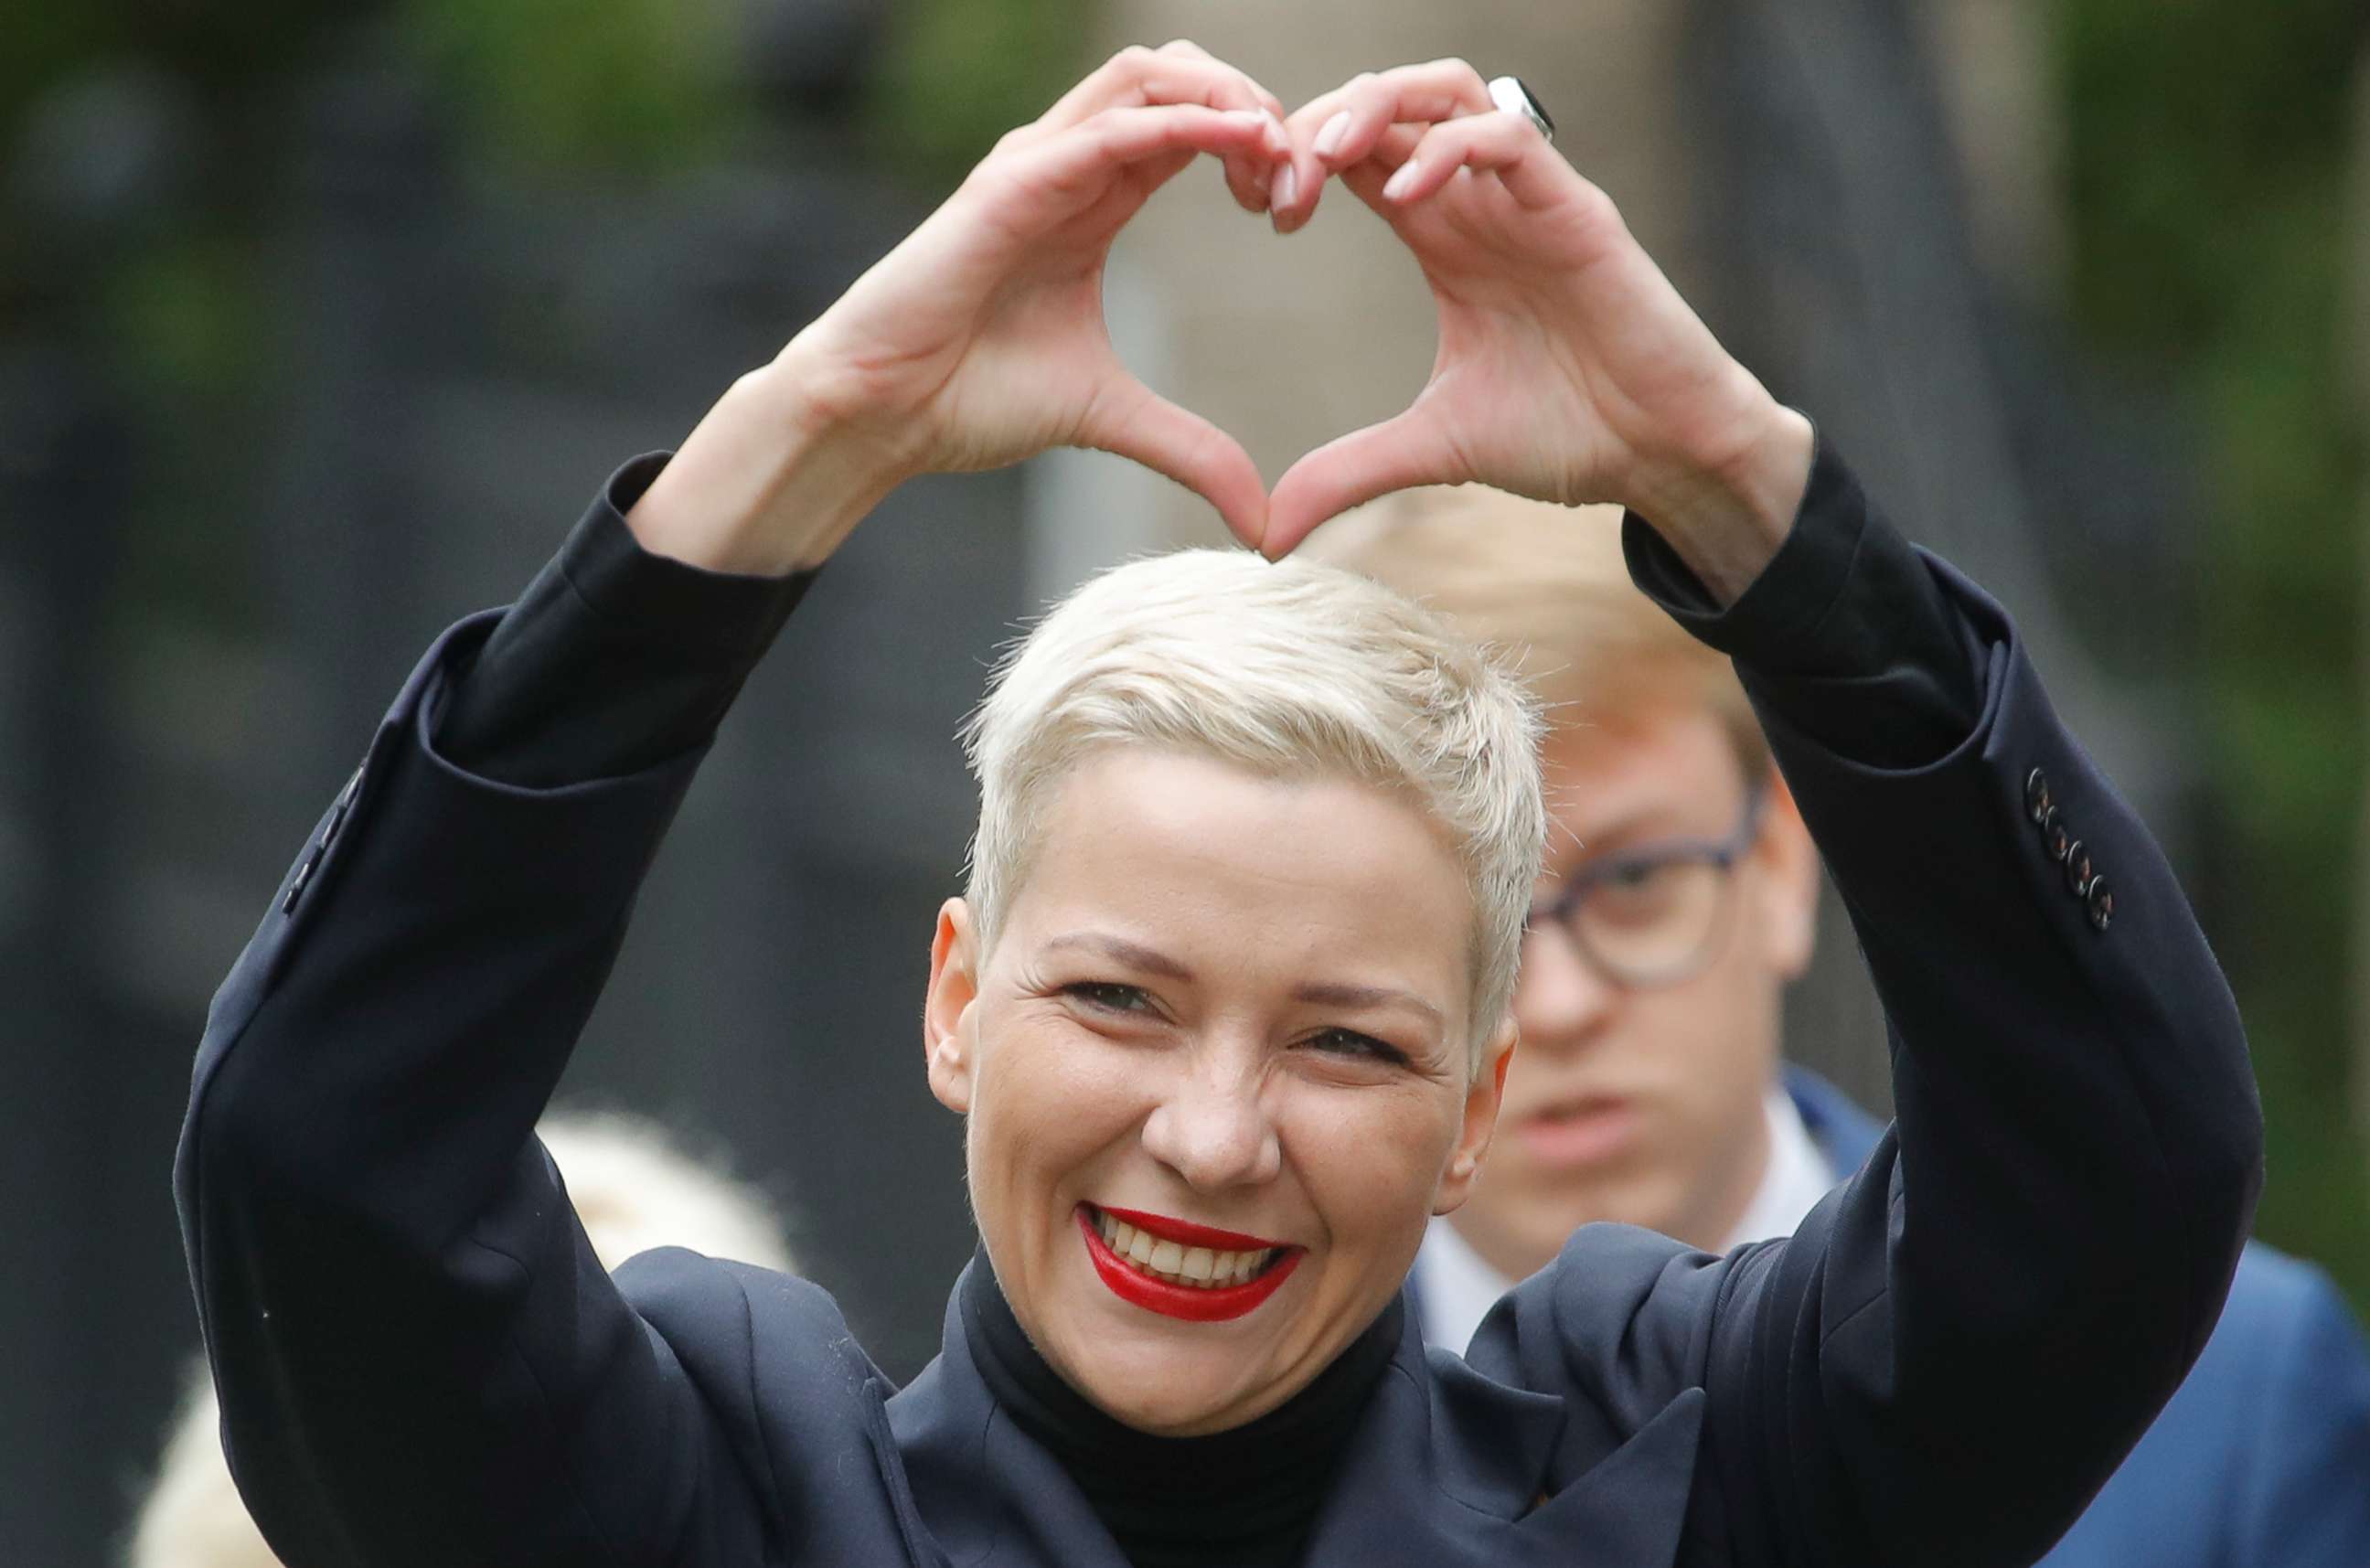 PHOTO: Belarusian opposition leader Maria Kolesnikova makes a heart sign with her hands while on her way to the Belarusian Investigative Committee in Minsk, Belarus, on Aug. 27, 2020.